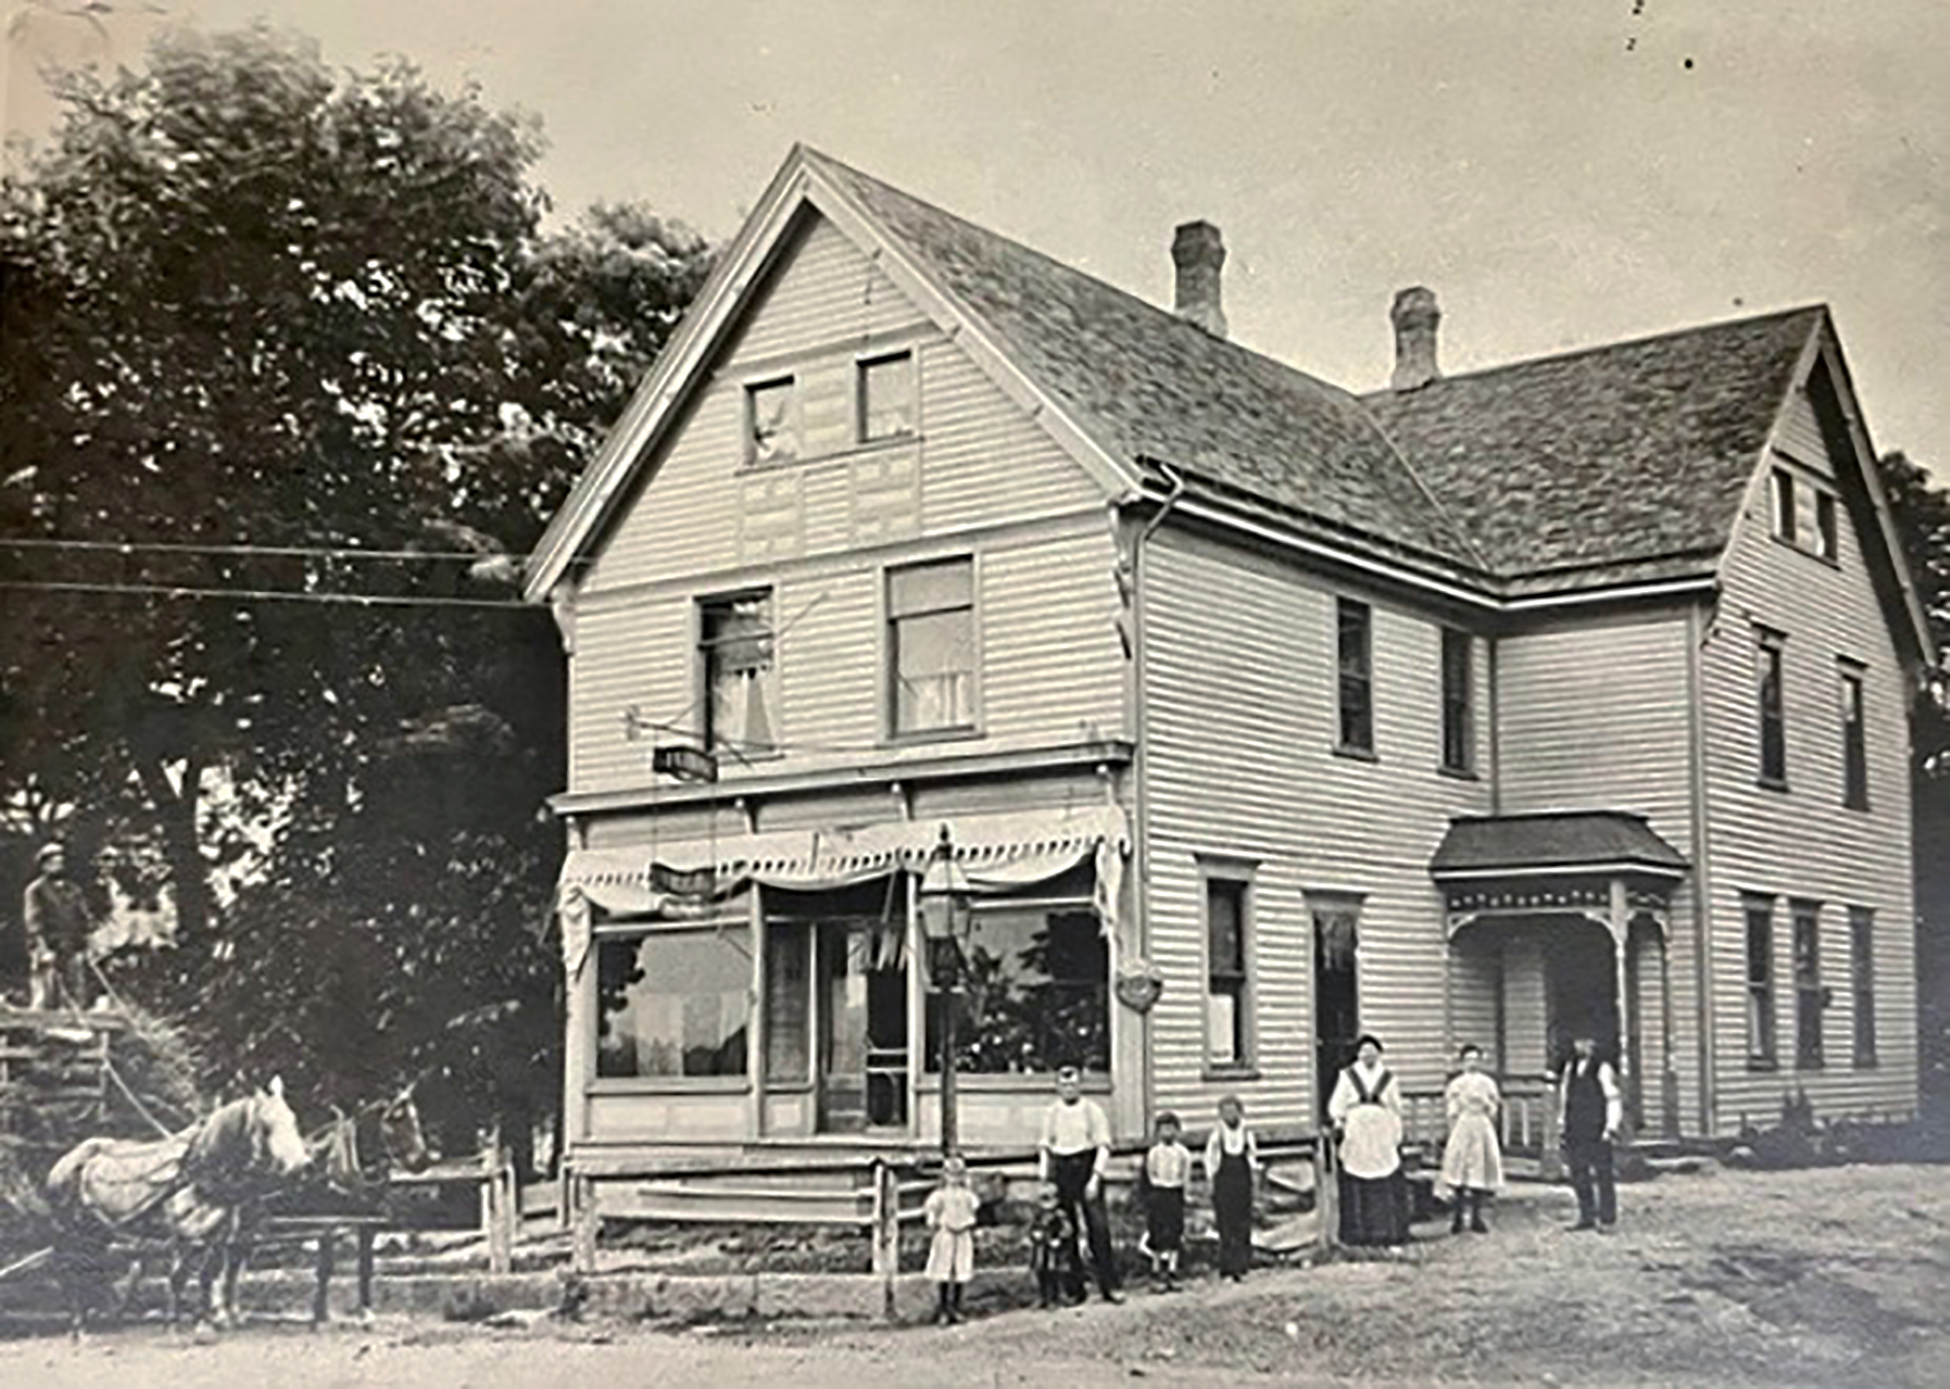 The Brueggemann family, German immigrants to Wisconsin, in front of their tavern in the 1900s.